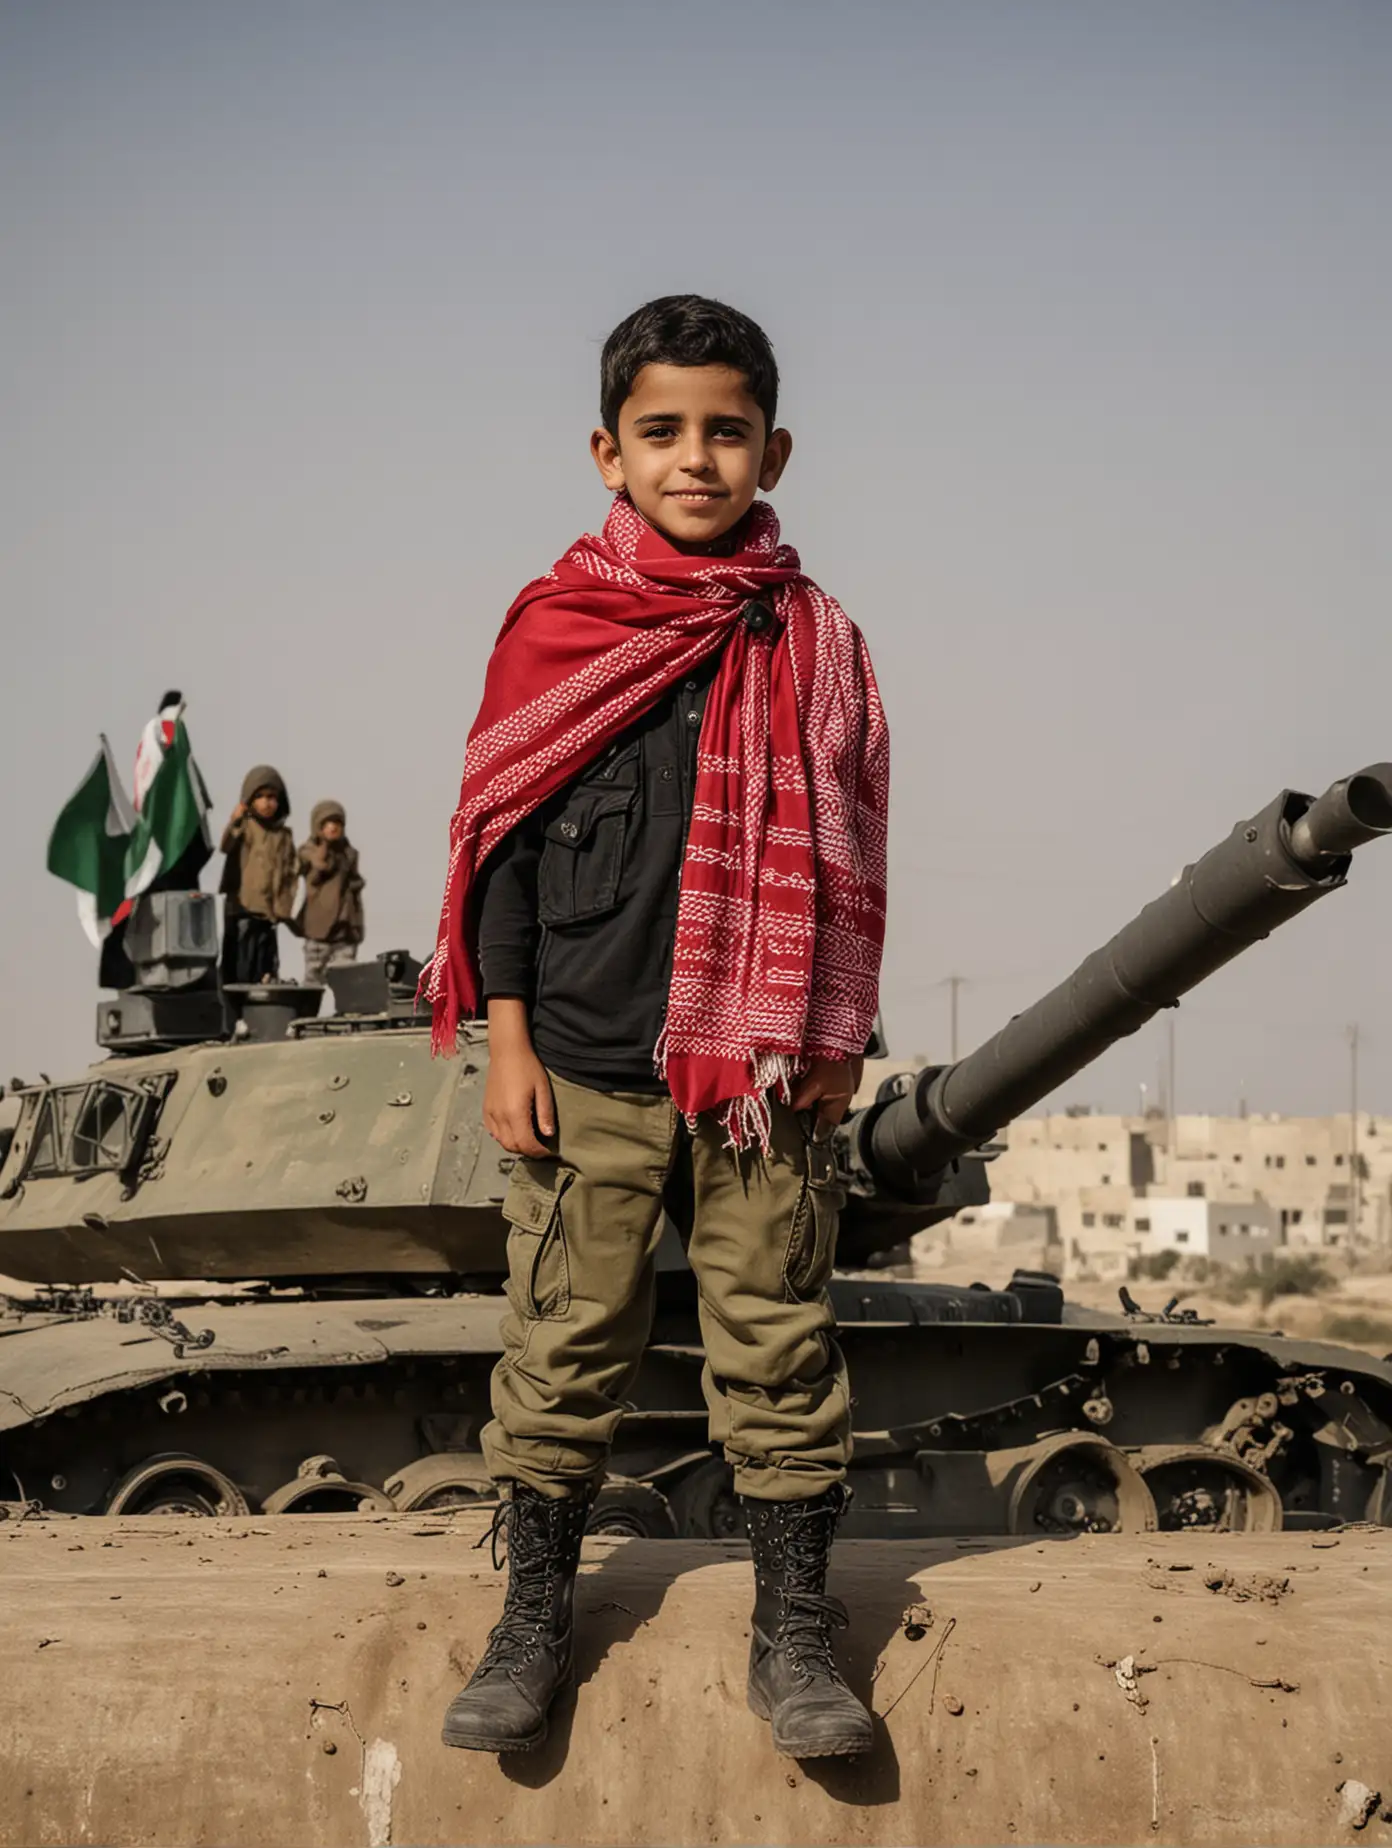 military Palestine kid wearing  red Saudi Shemagh in GAZA standing on a tank